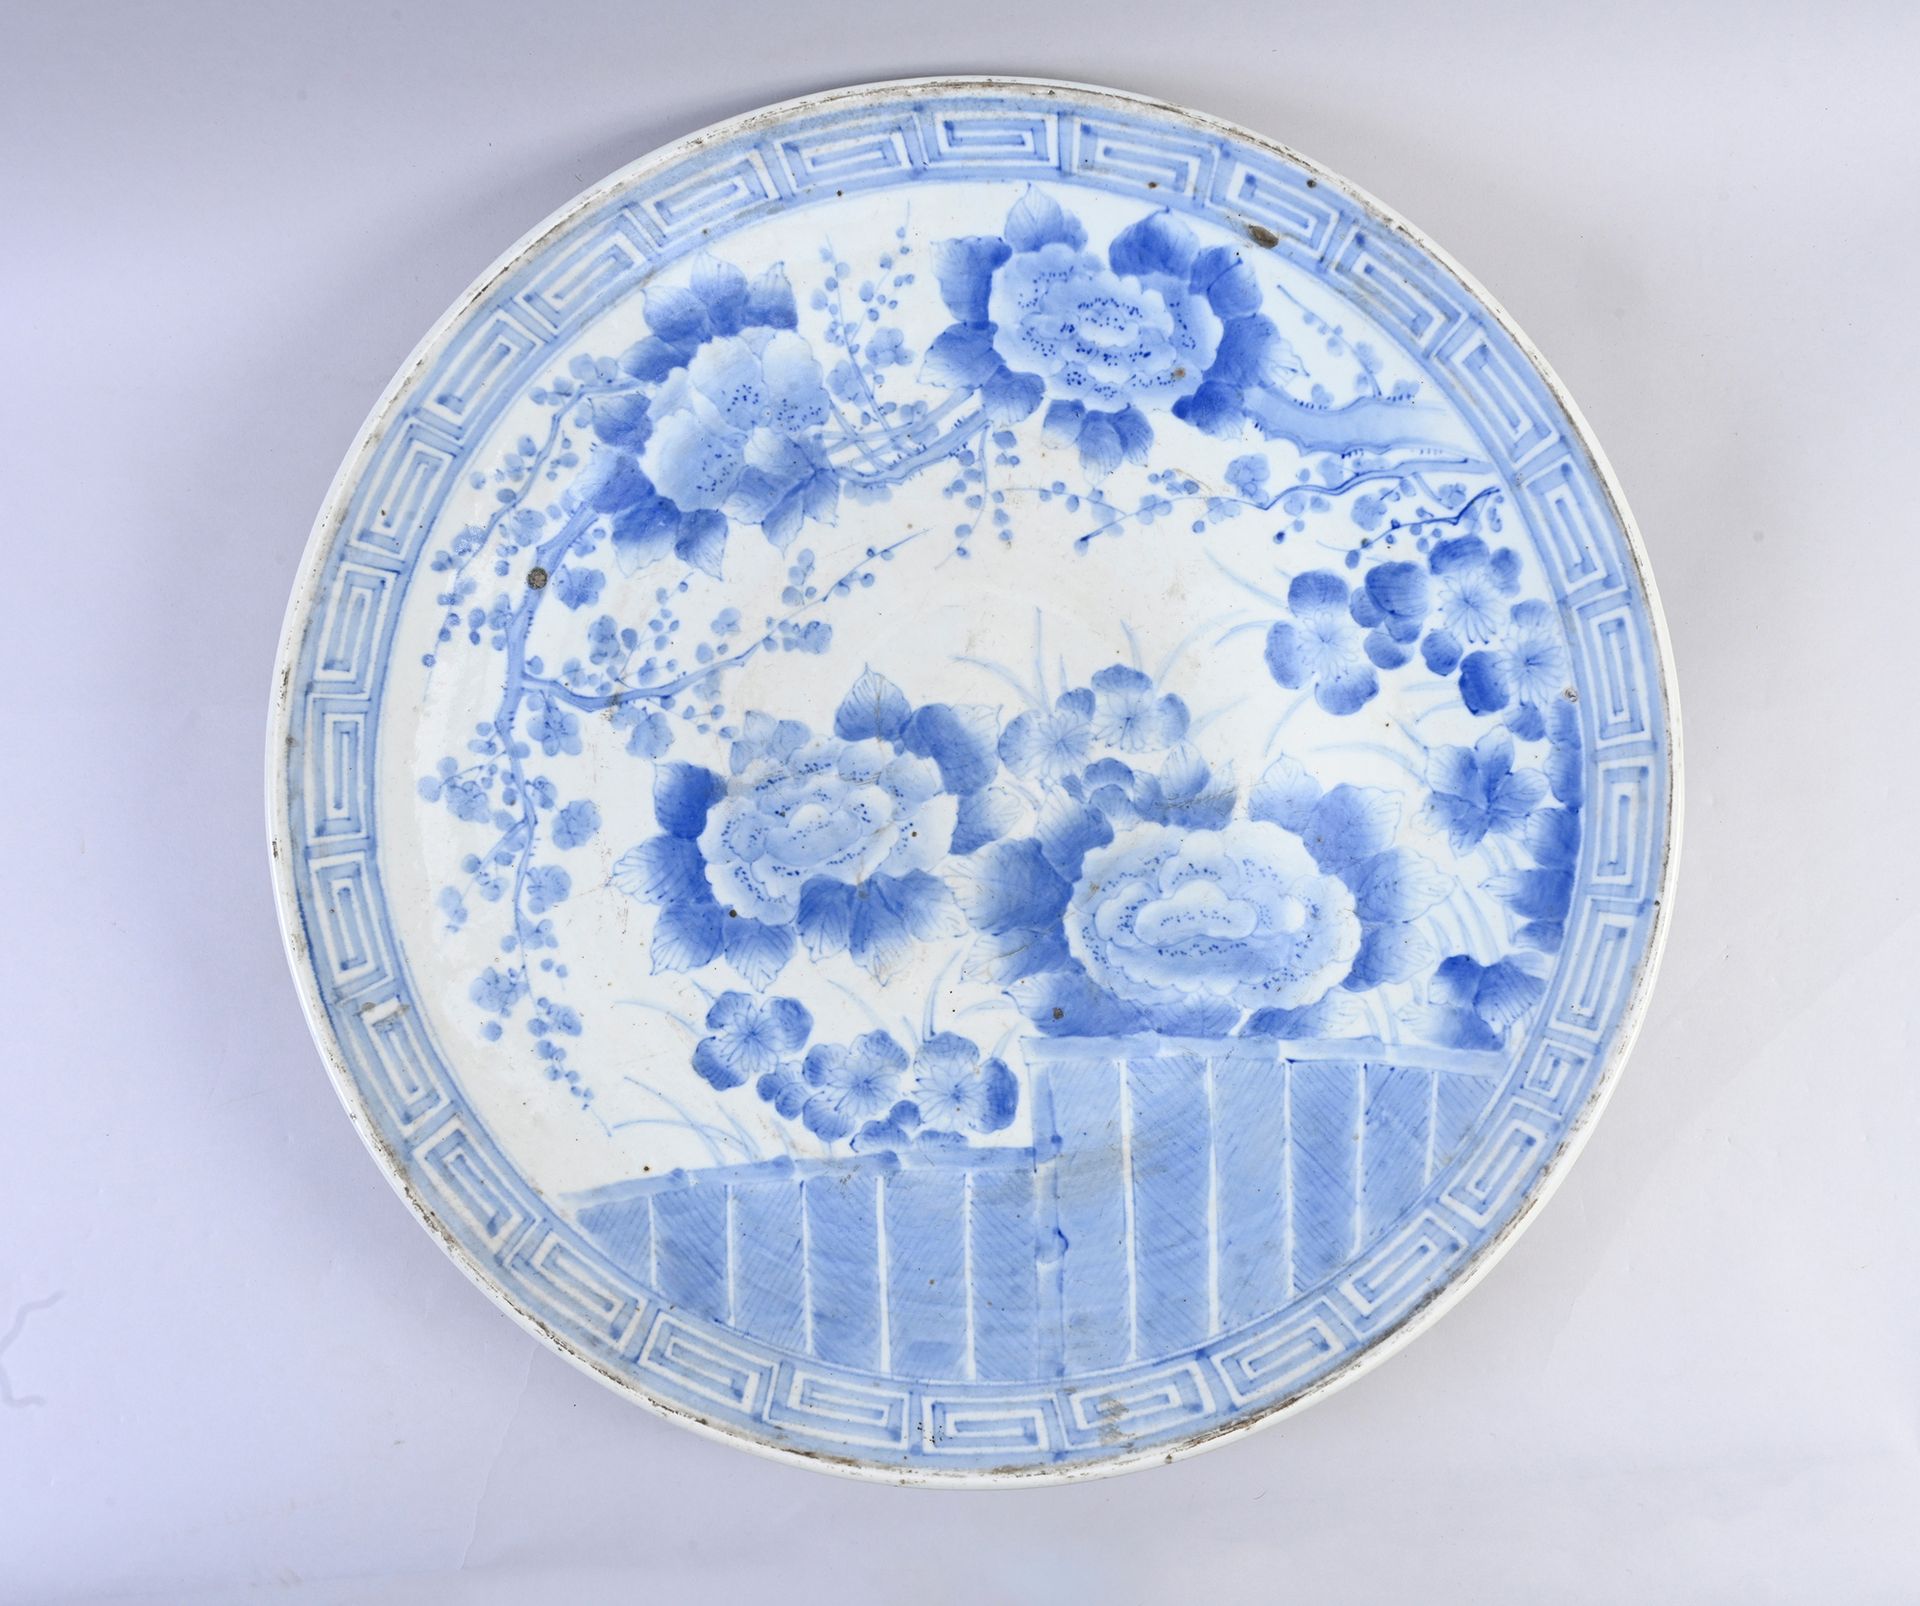 JAPON, XIXe siècle Pair of large porcelain dishes
Decorated in blue and white wi&hellip;